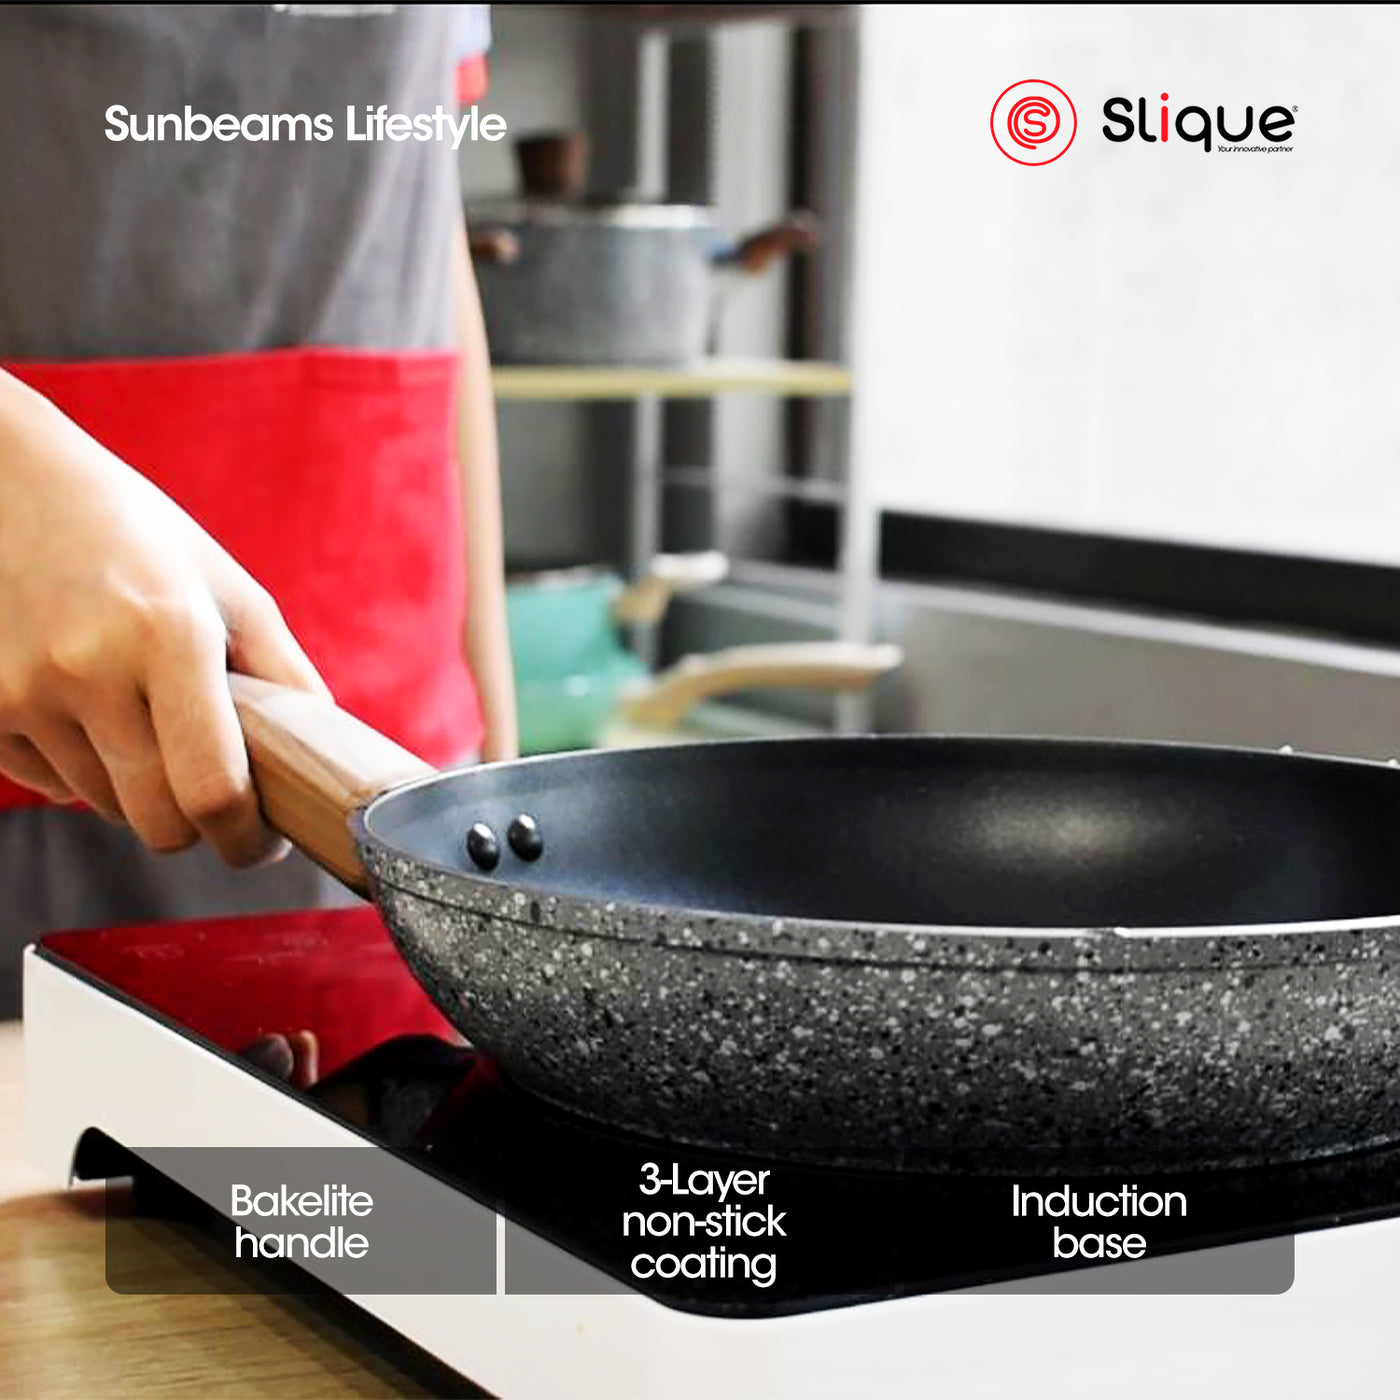 SLIQUE Granite Fry Pan Premium Multi Layer Non-Stick Coating Induction Base Wooden Finish Amazing Gift Idea For Any Occasion!